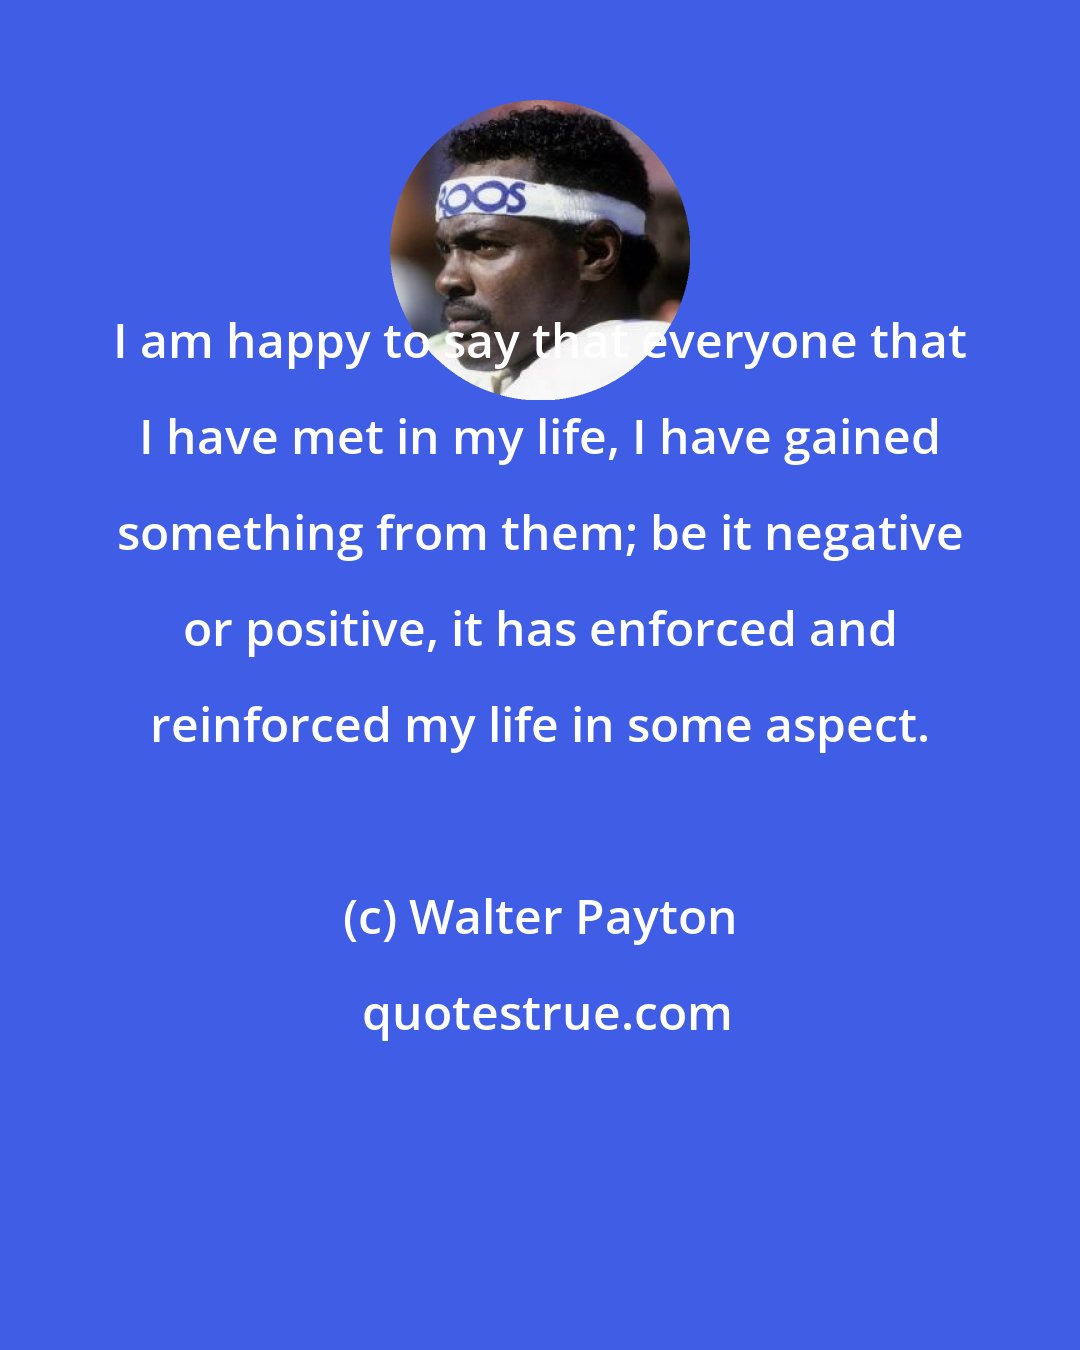 Walter Payton: I am happy to say that everyone that I have met in my life, I have gained something from them; be it negative or positive, it has enforced and reinforced my life in some aspect.